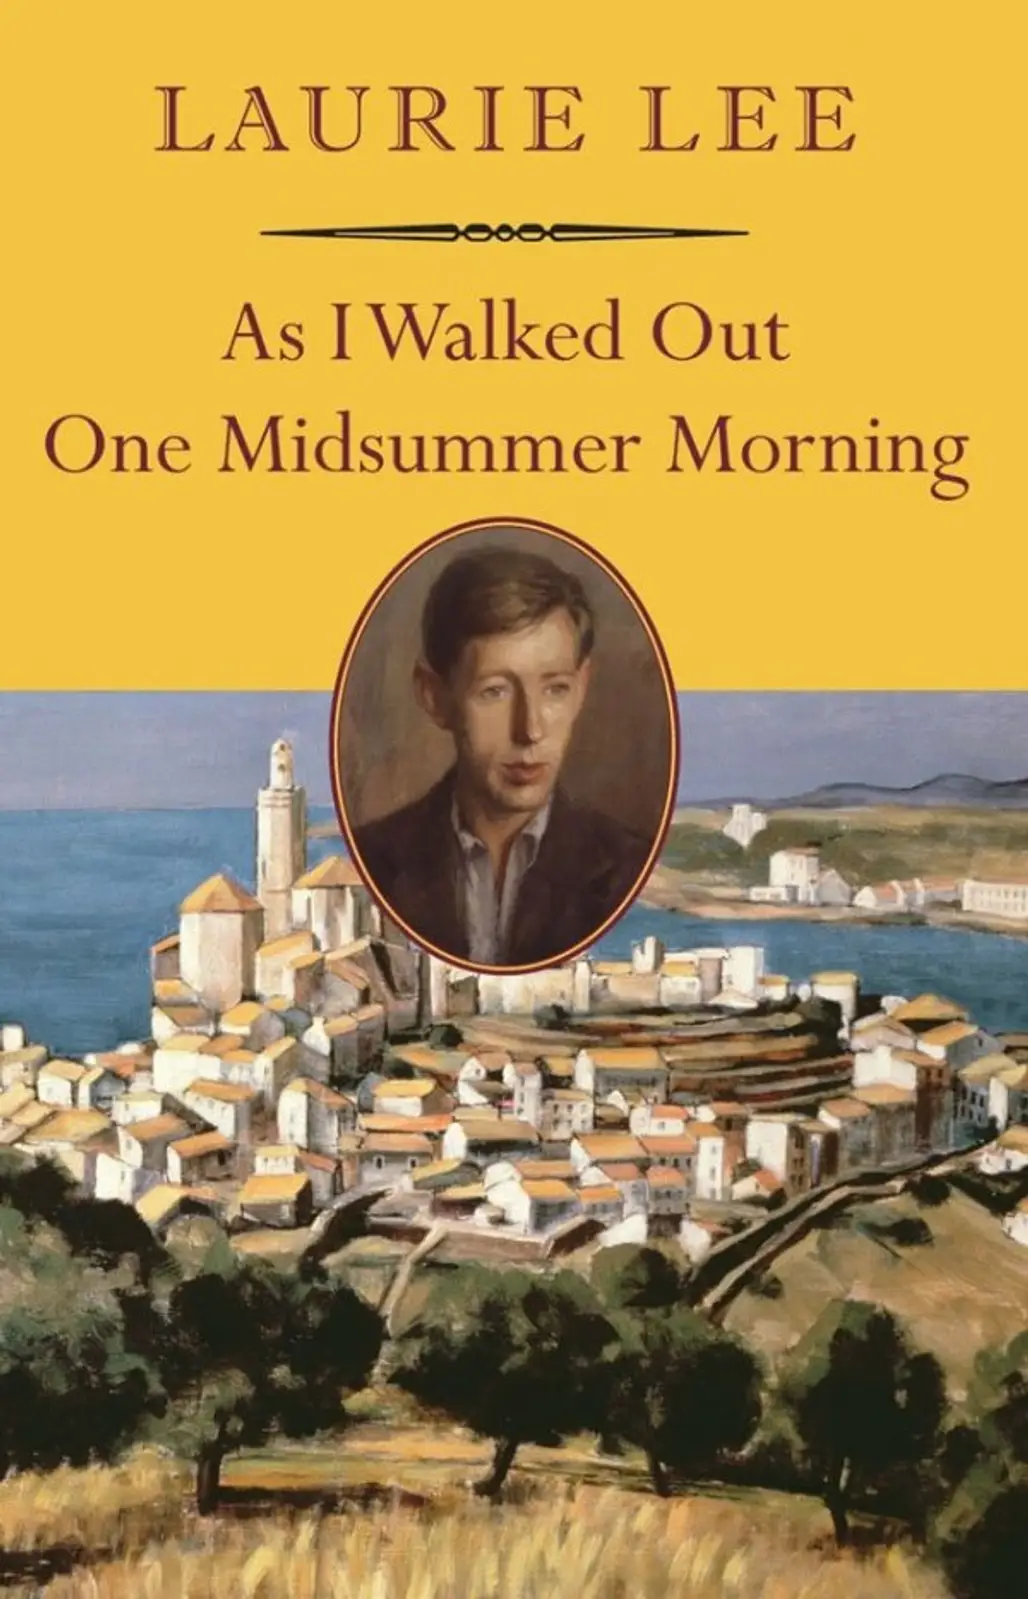 As I Walked out One Midsummer Morning by Laurie Lee